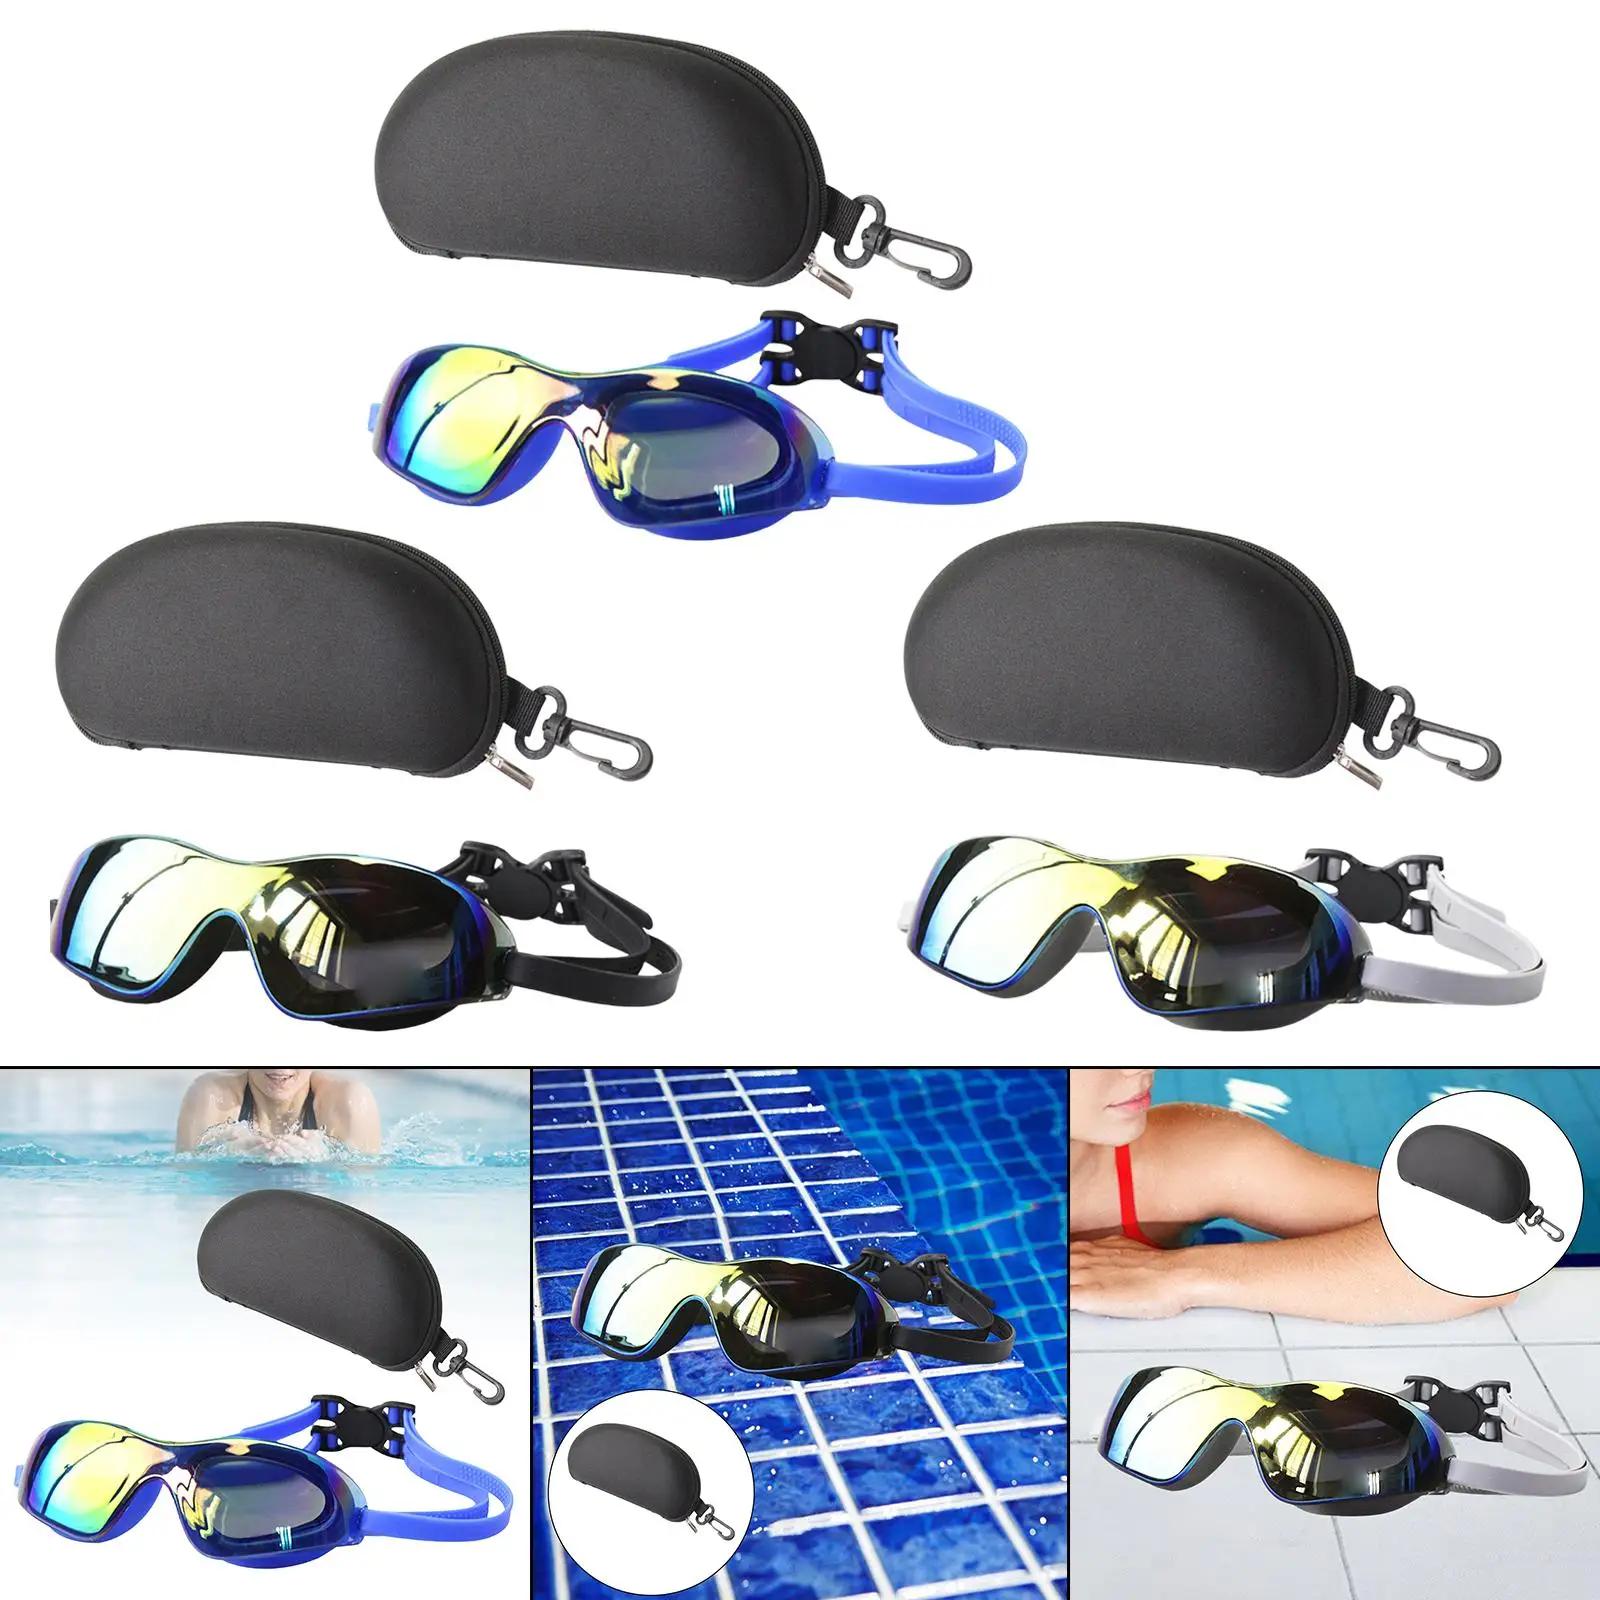 Professional Swim Glasses, Large Frame Outdoor Adjustable Waterproof Anti Skid Clear View